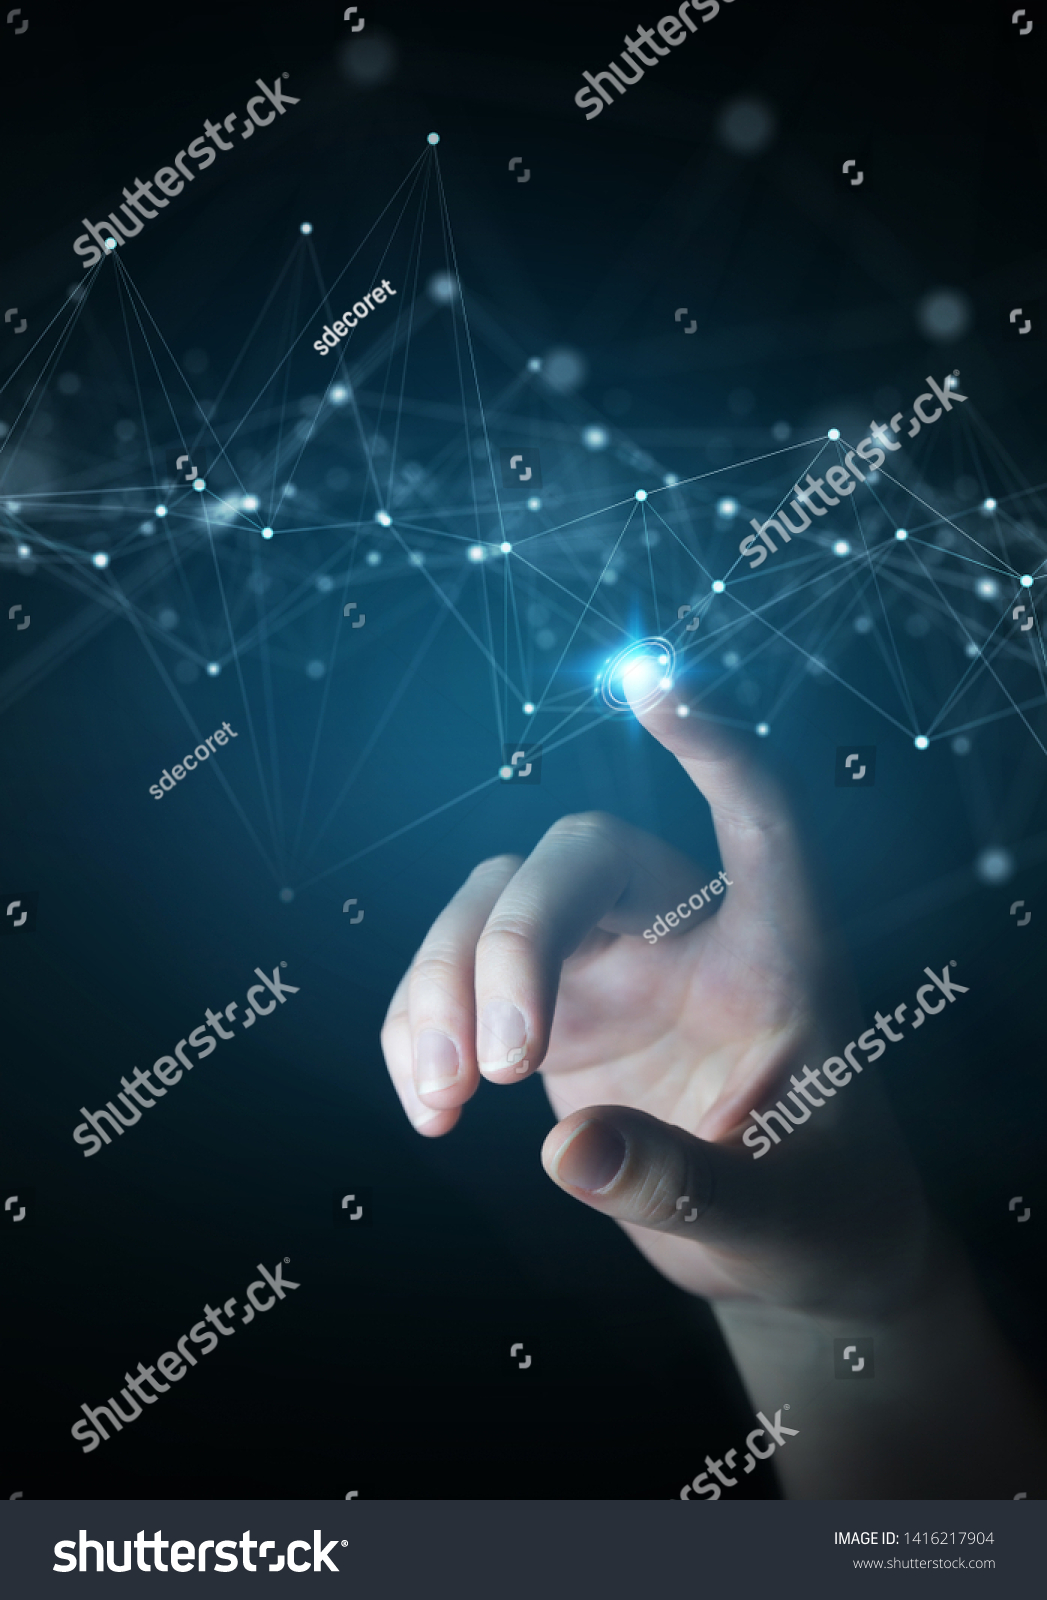 Businessman on dark background using floating digital network connections with dots and lines 3D rendering #1416217904